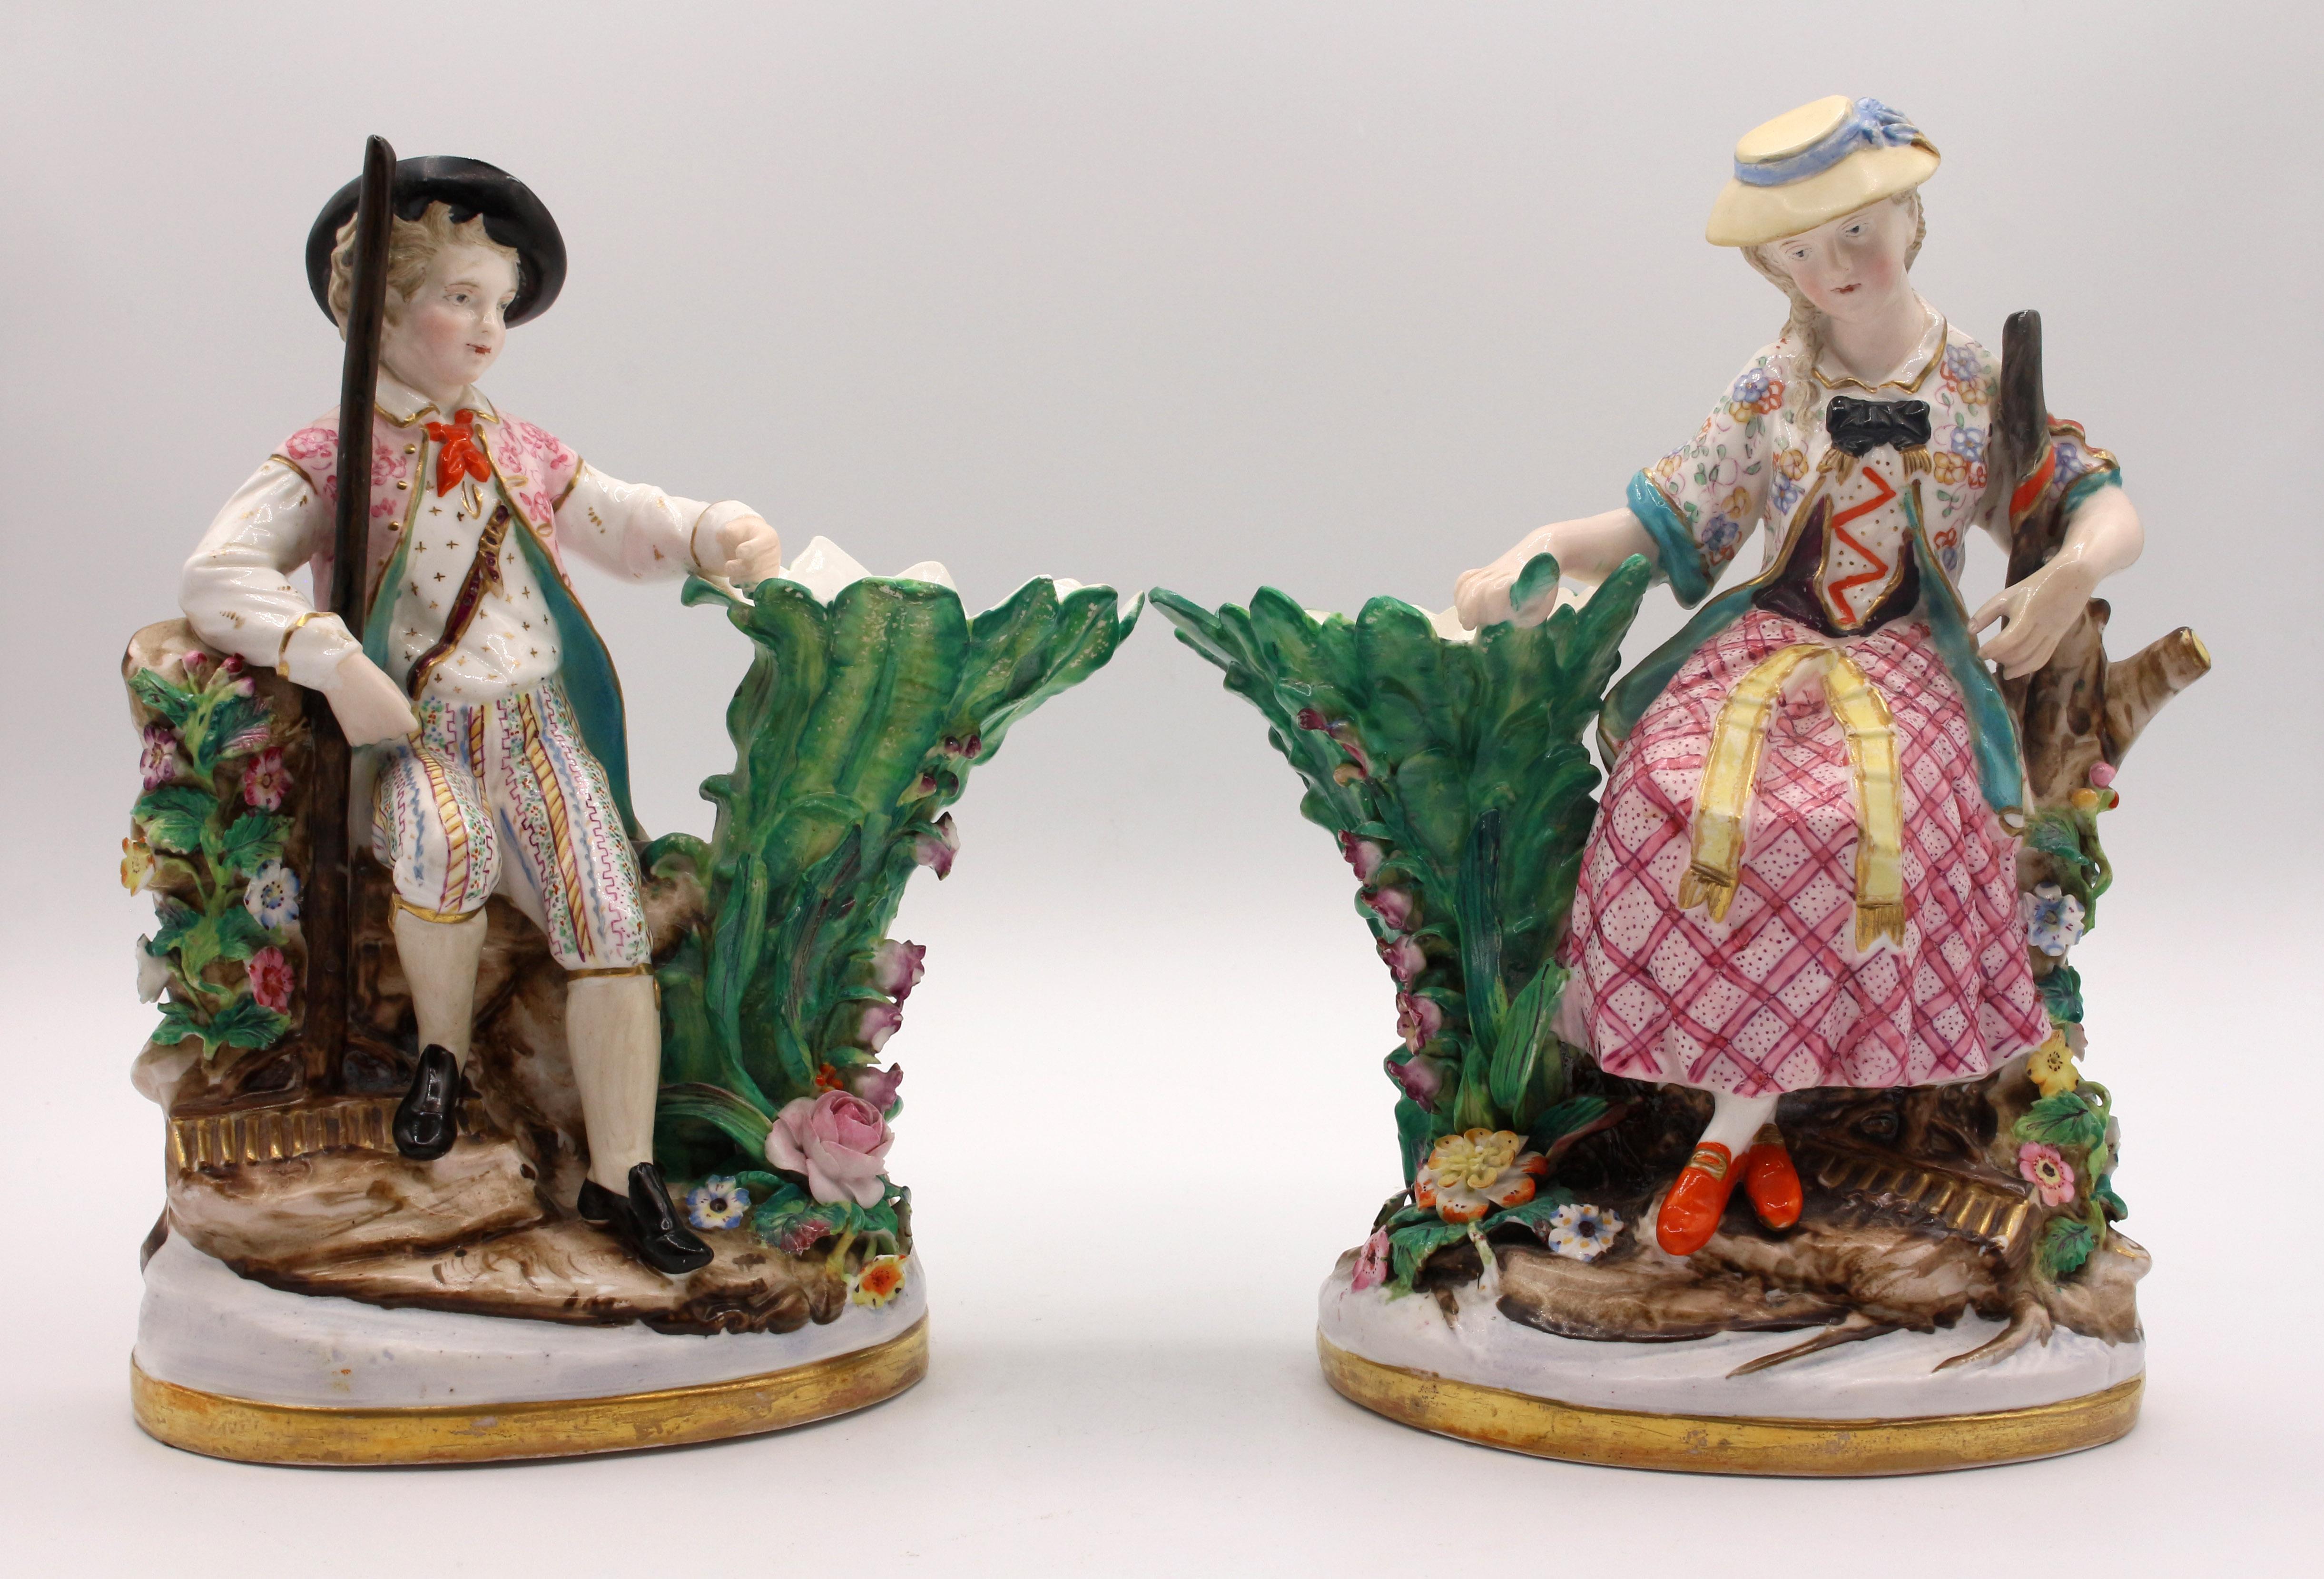 Circa 1890 pair of gardener figure porcelain spill vases by Schierholz factory, German. 1865-1907 marks. Each seated on wooden 